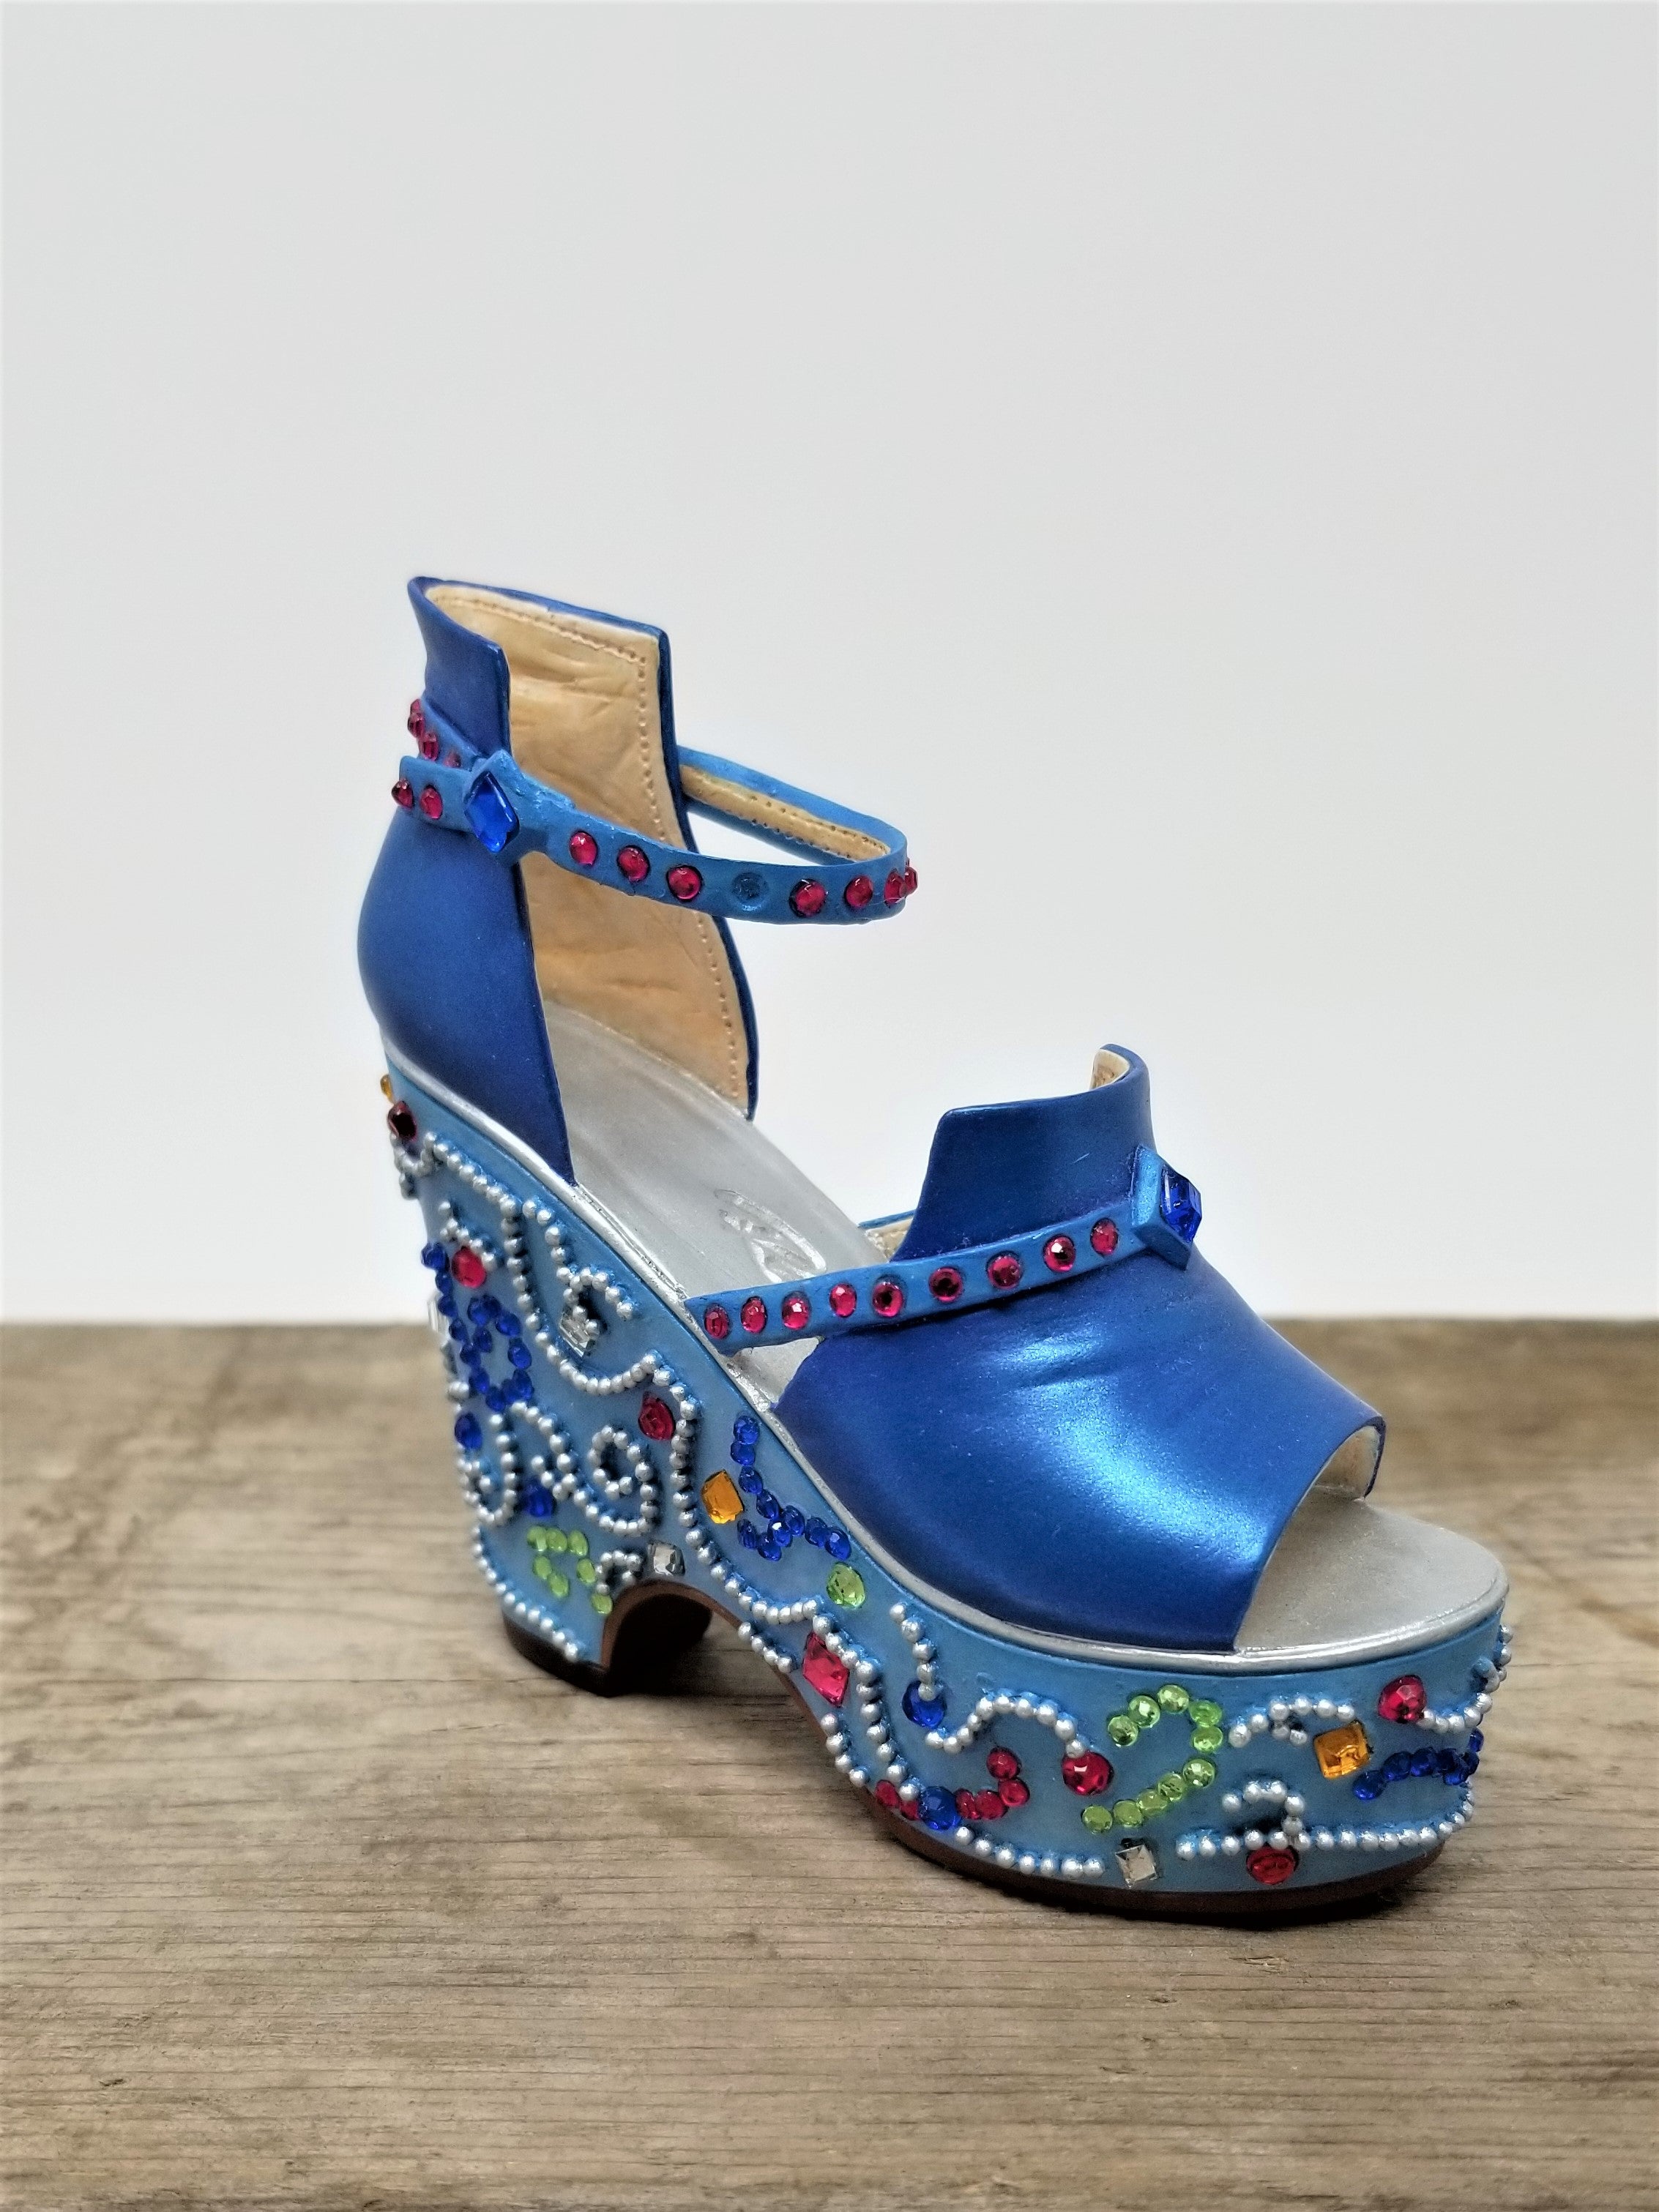 Blue Miniature Platform shoe Loaded with Pearls and Rhinestone